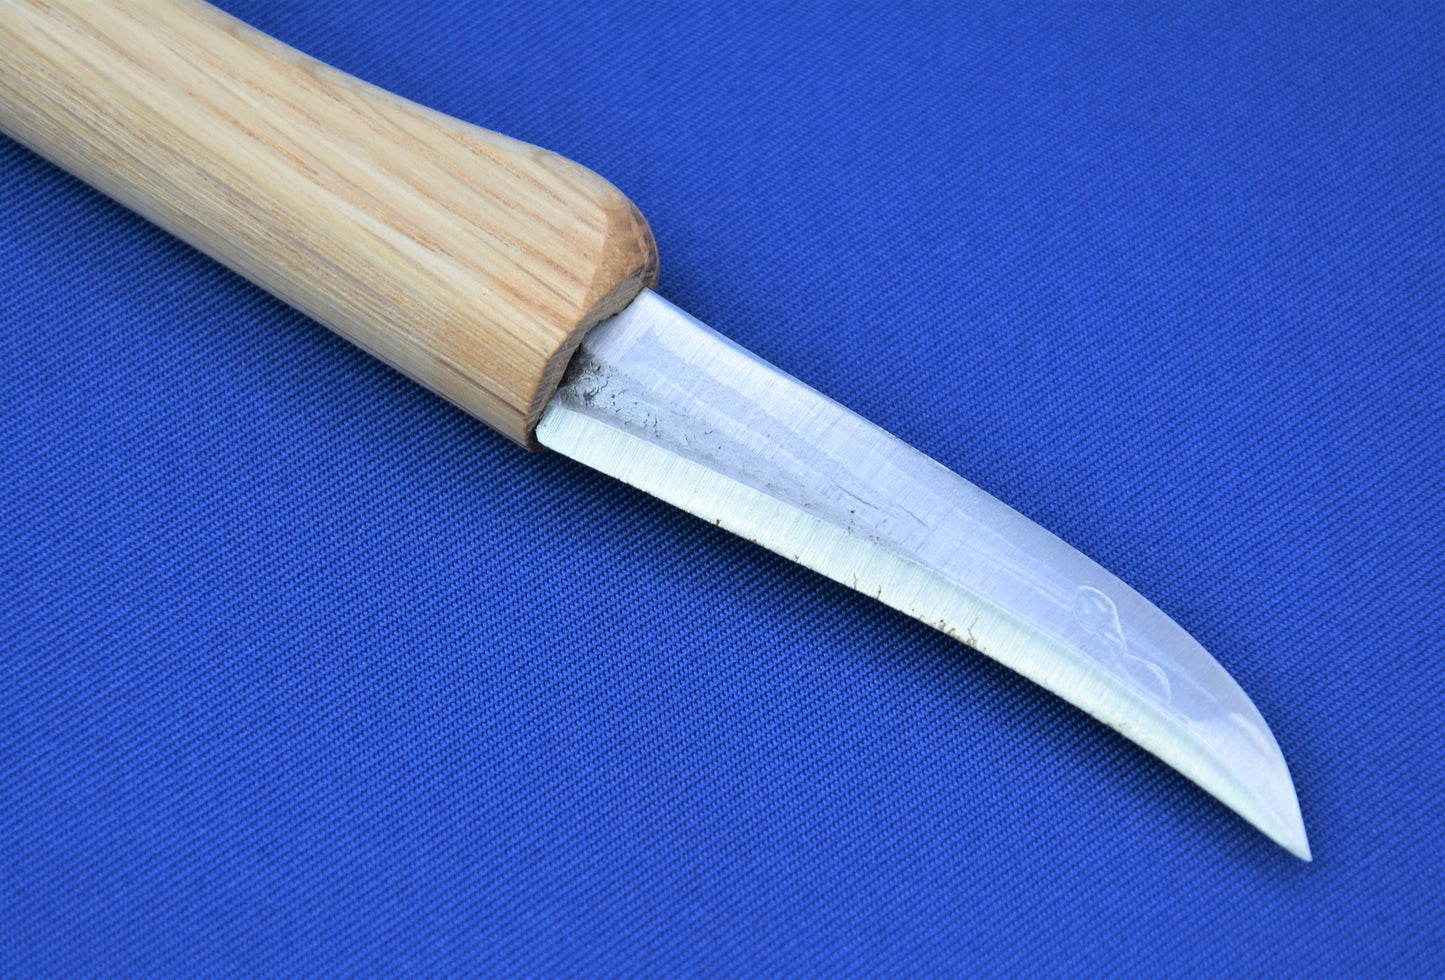 Wood Carving Knife - Trailing Point